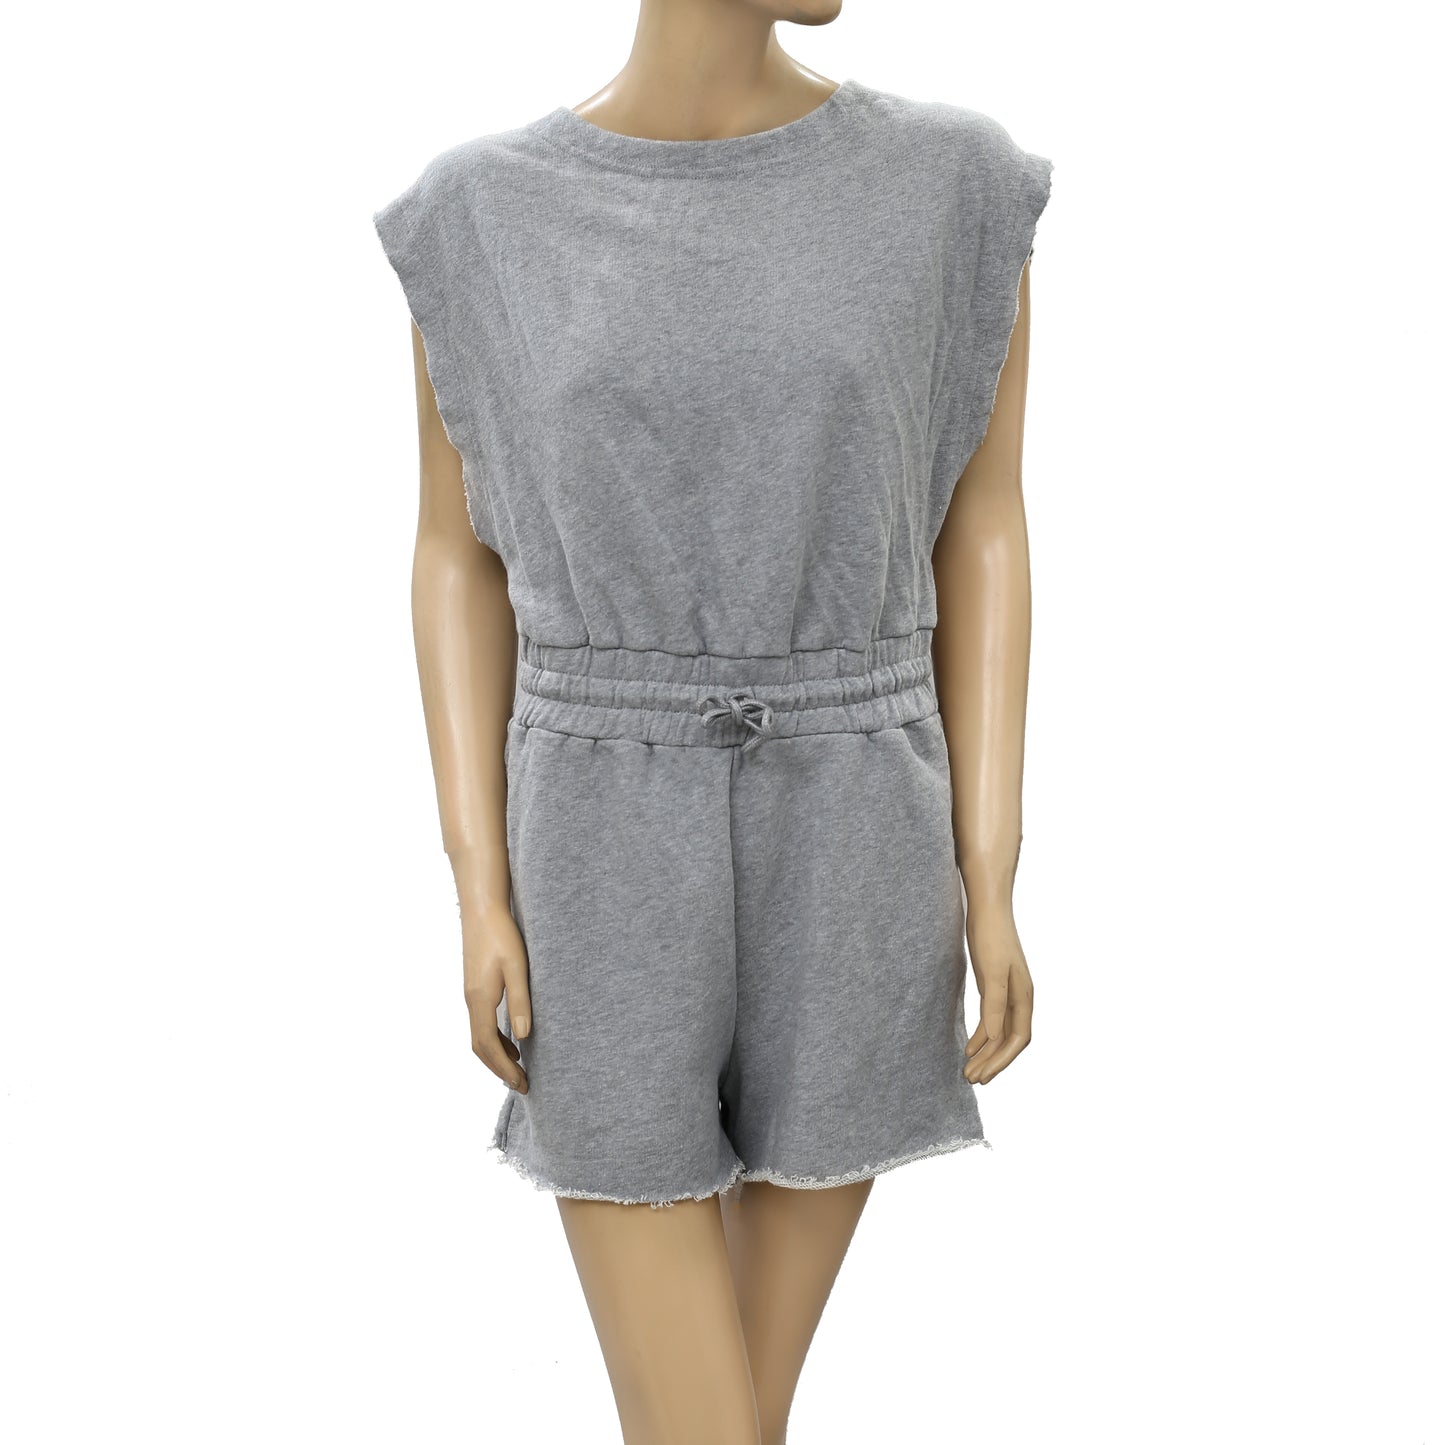 Out From Under Urban Outfitters Tina Terry Romper Dress